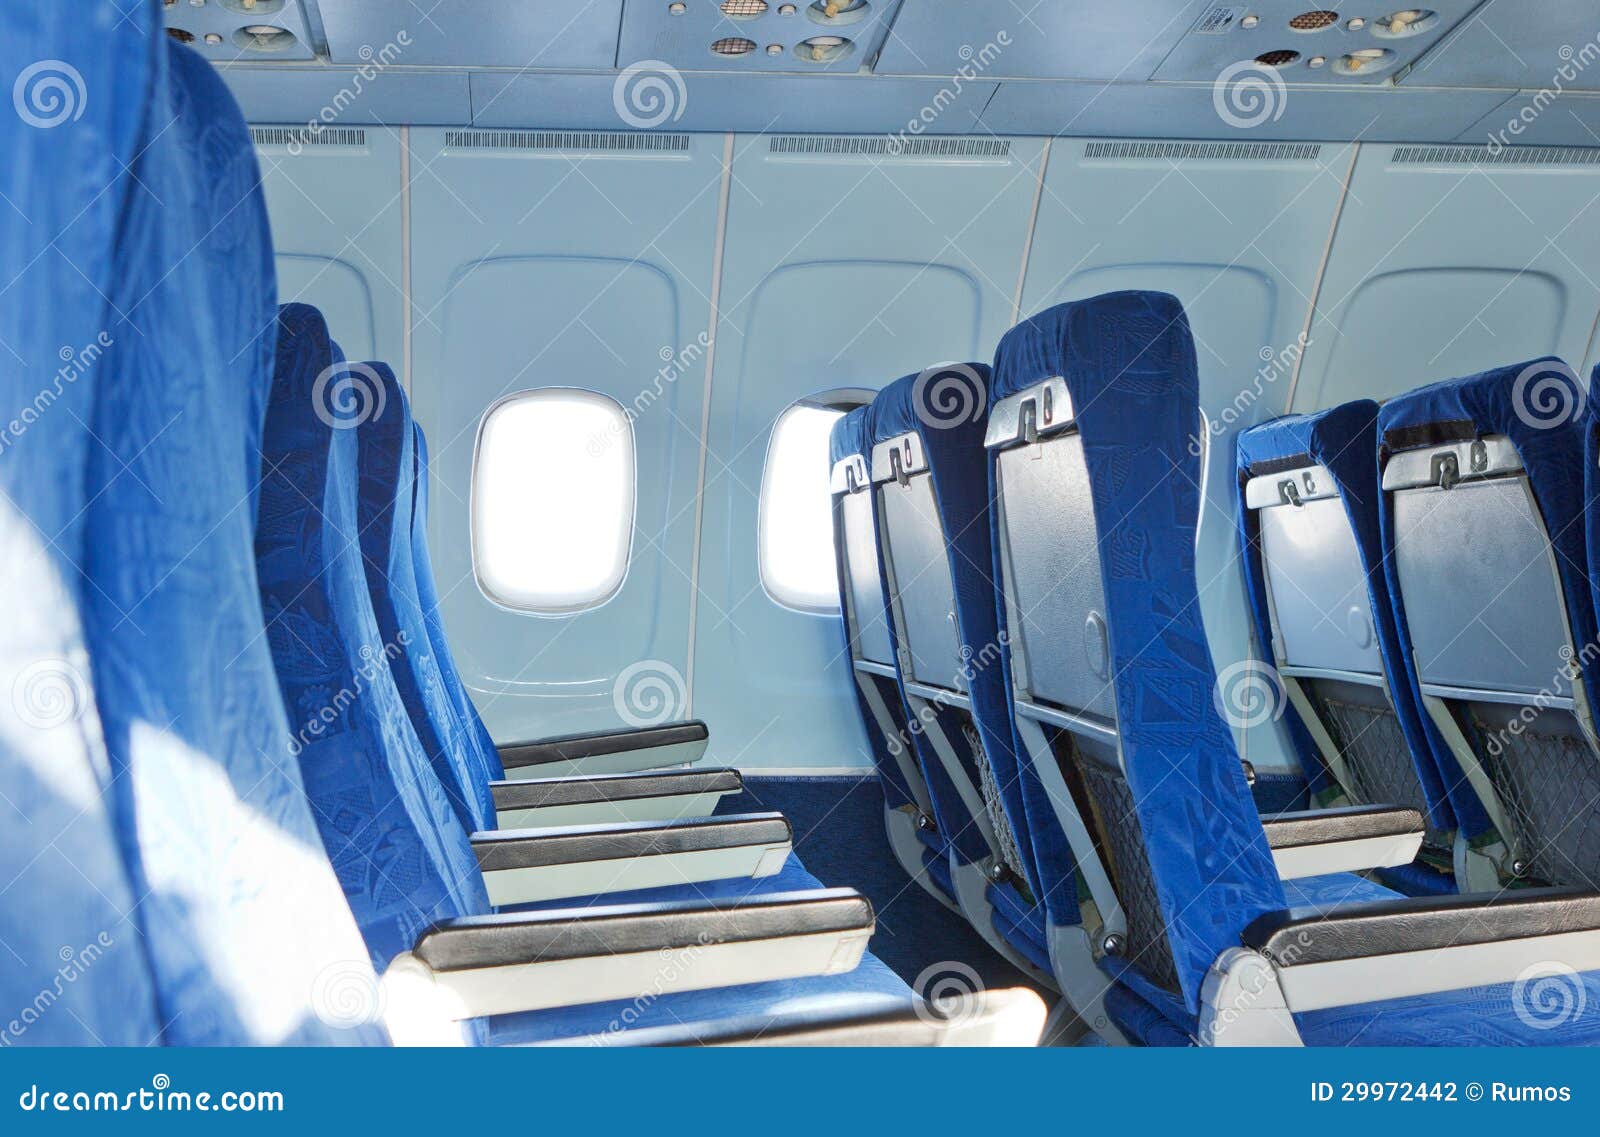 Chairs In The Plane Stock Photo Image Of White Cabin